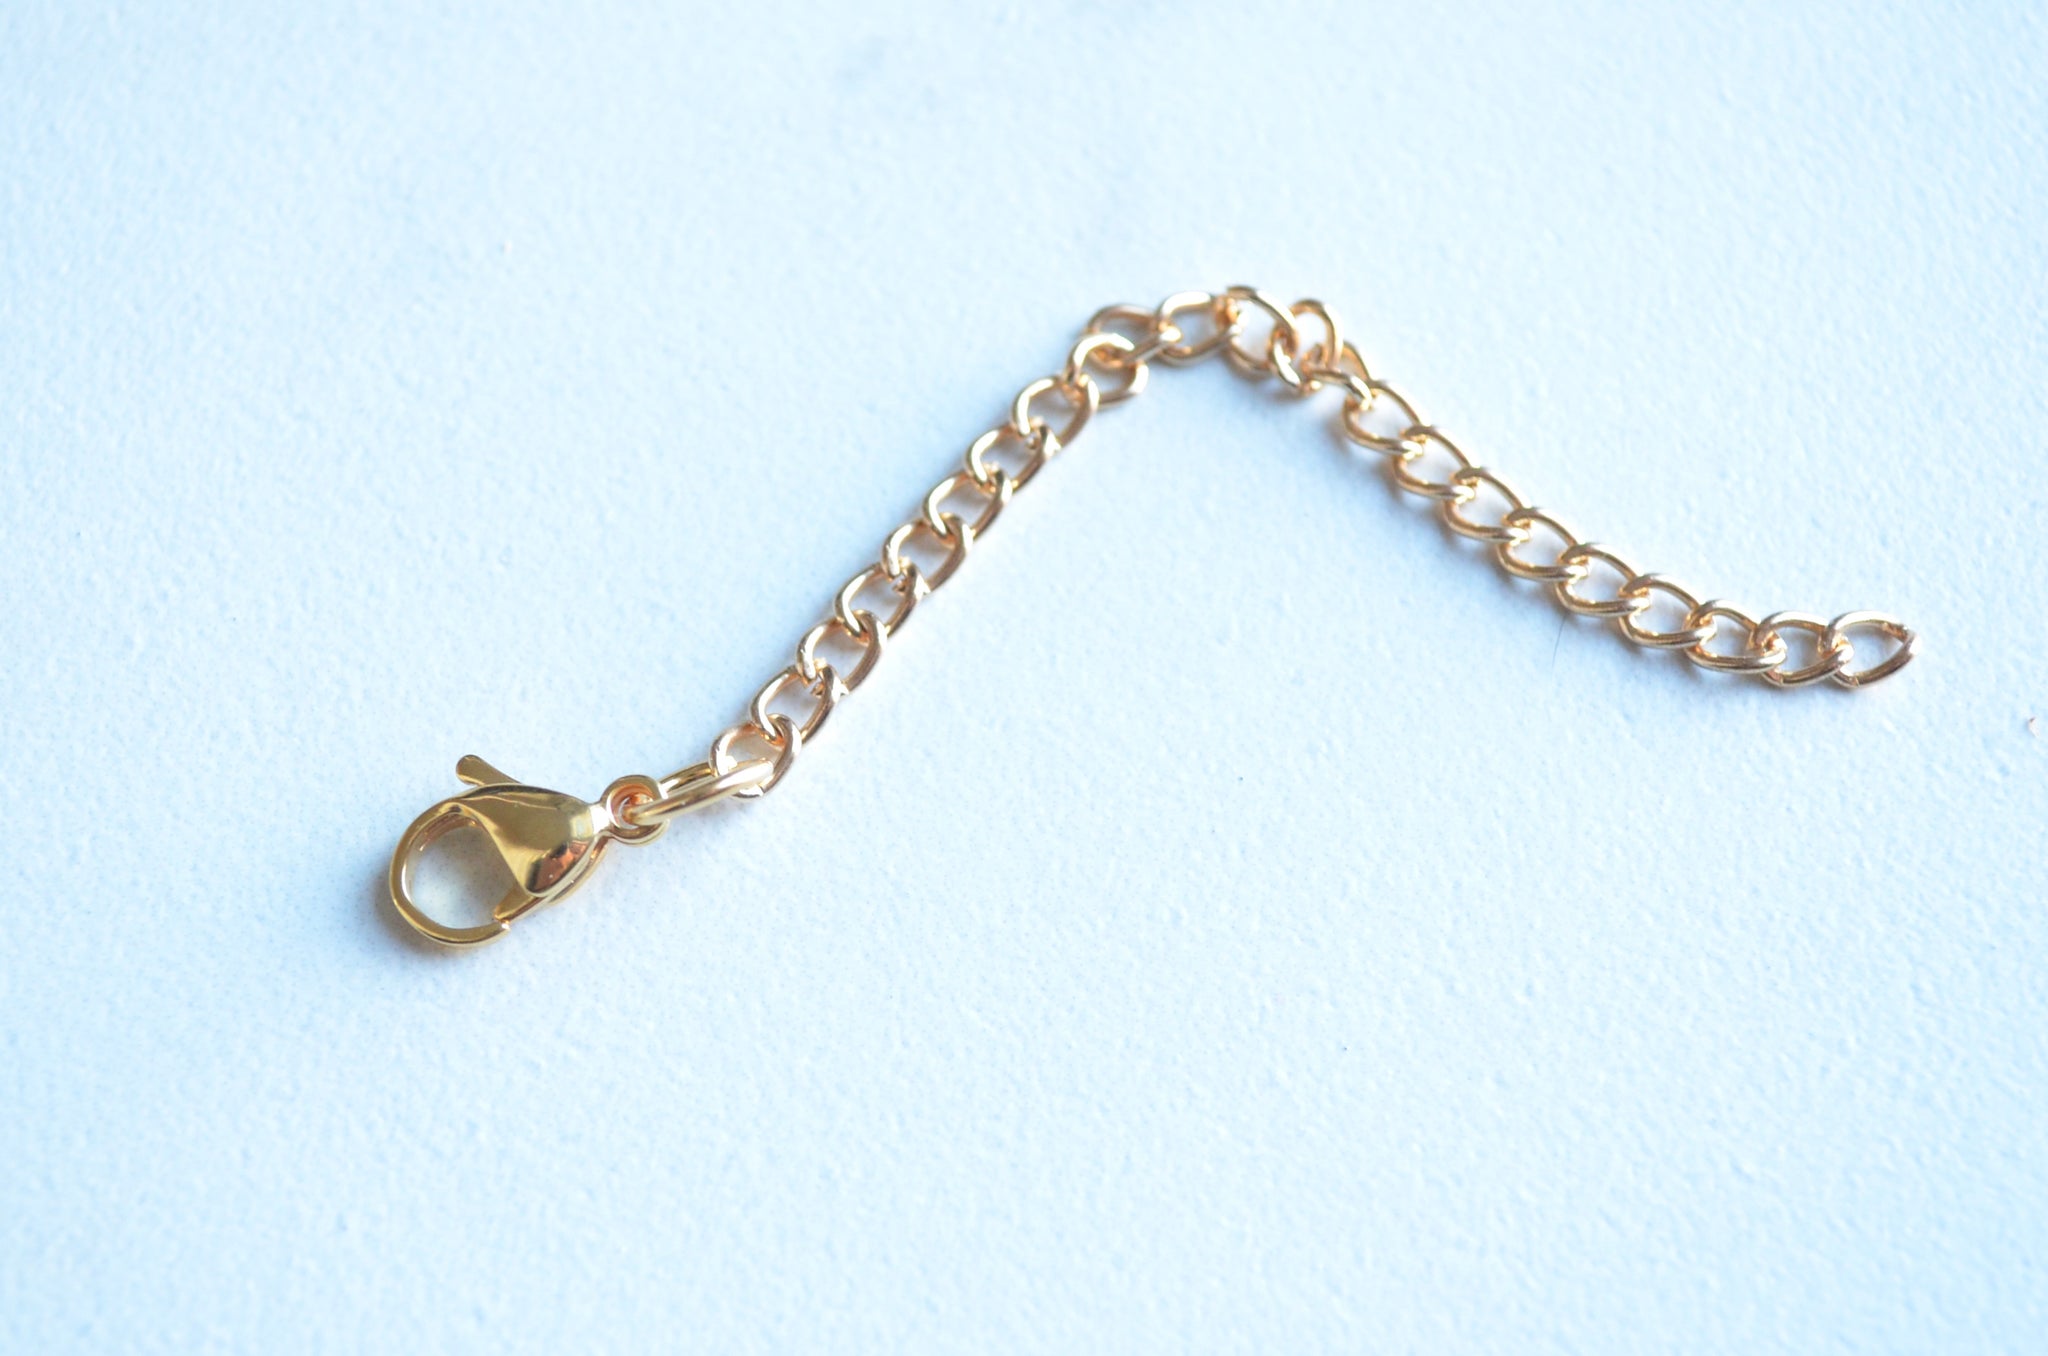 Gold Extension Chain Extensions Chains Jewelry Extenders Clasp For